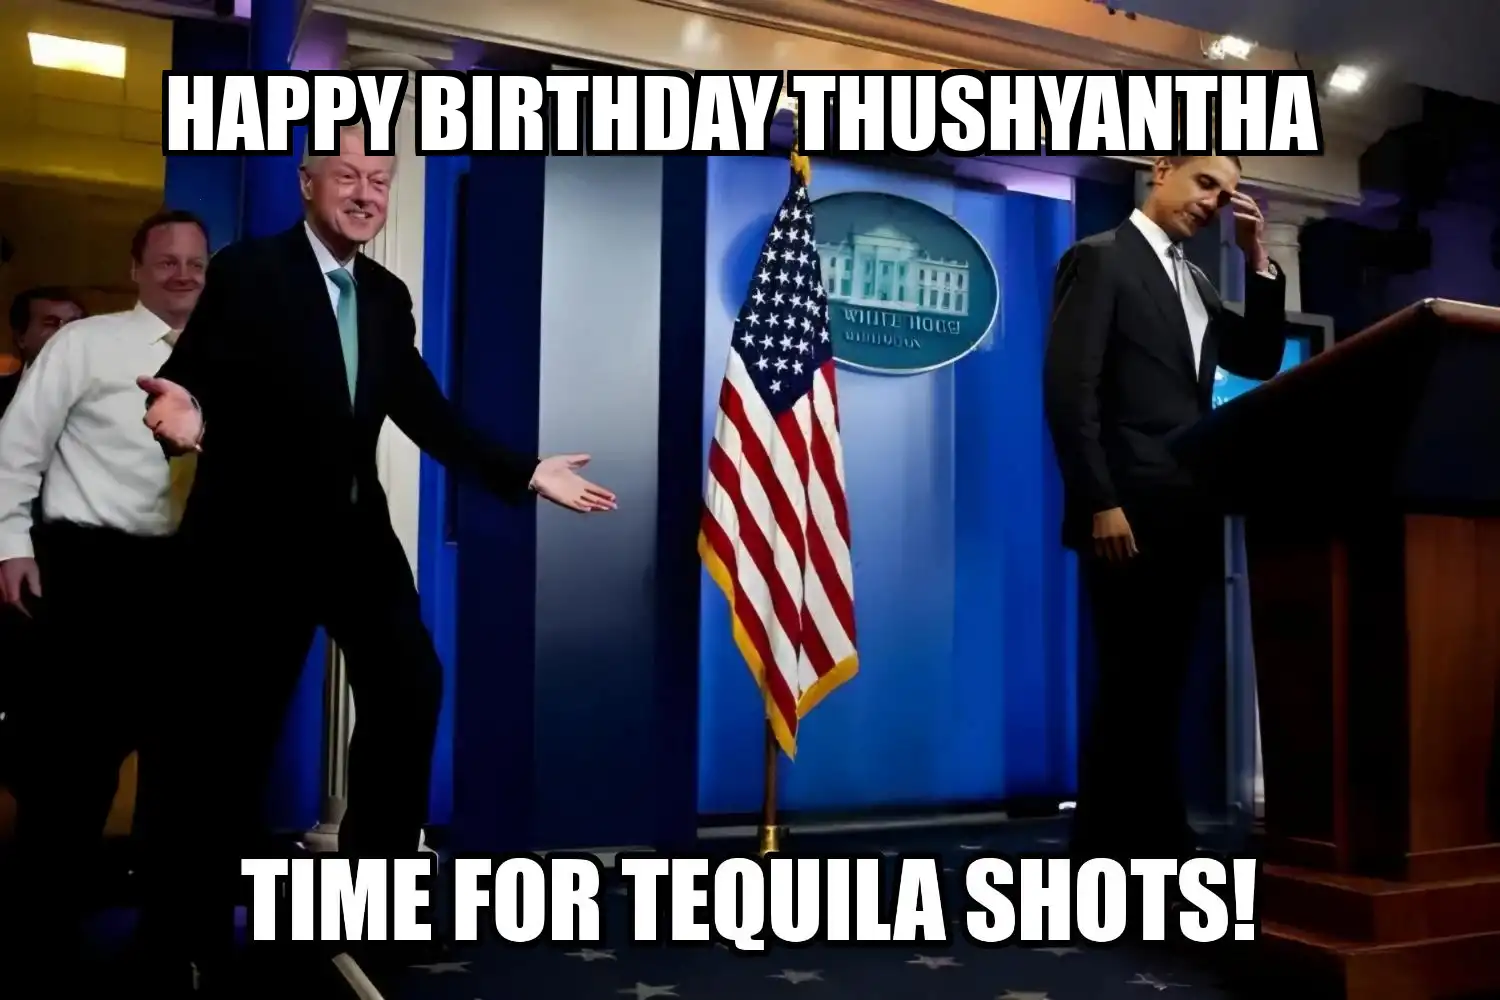 Happy Birthday Thushyantha Time For Tequila Shots Memes